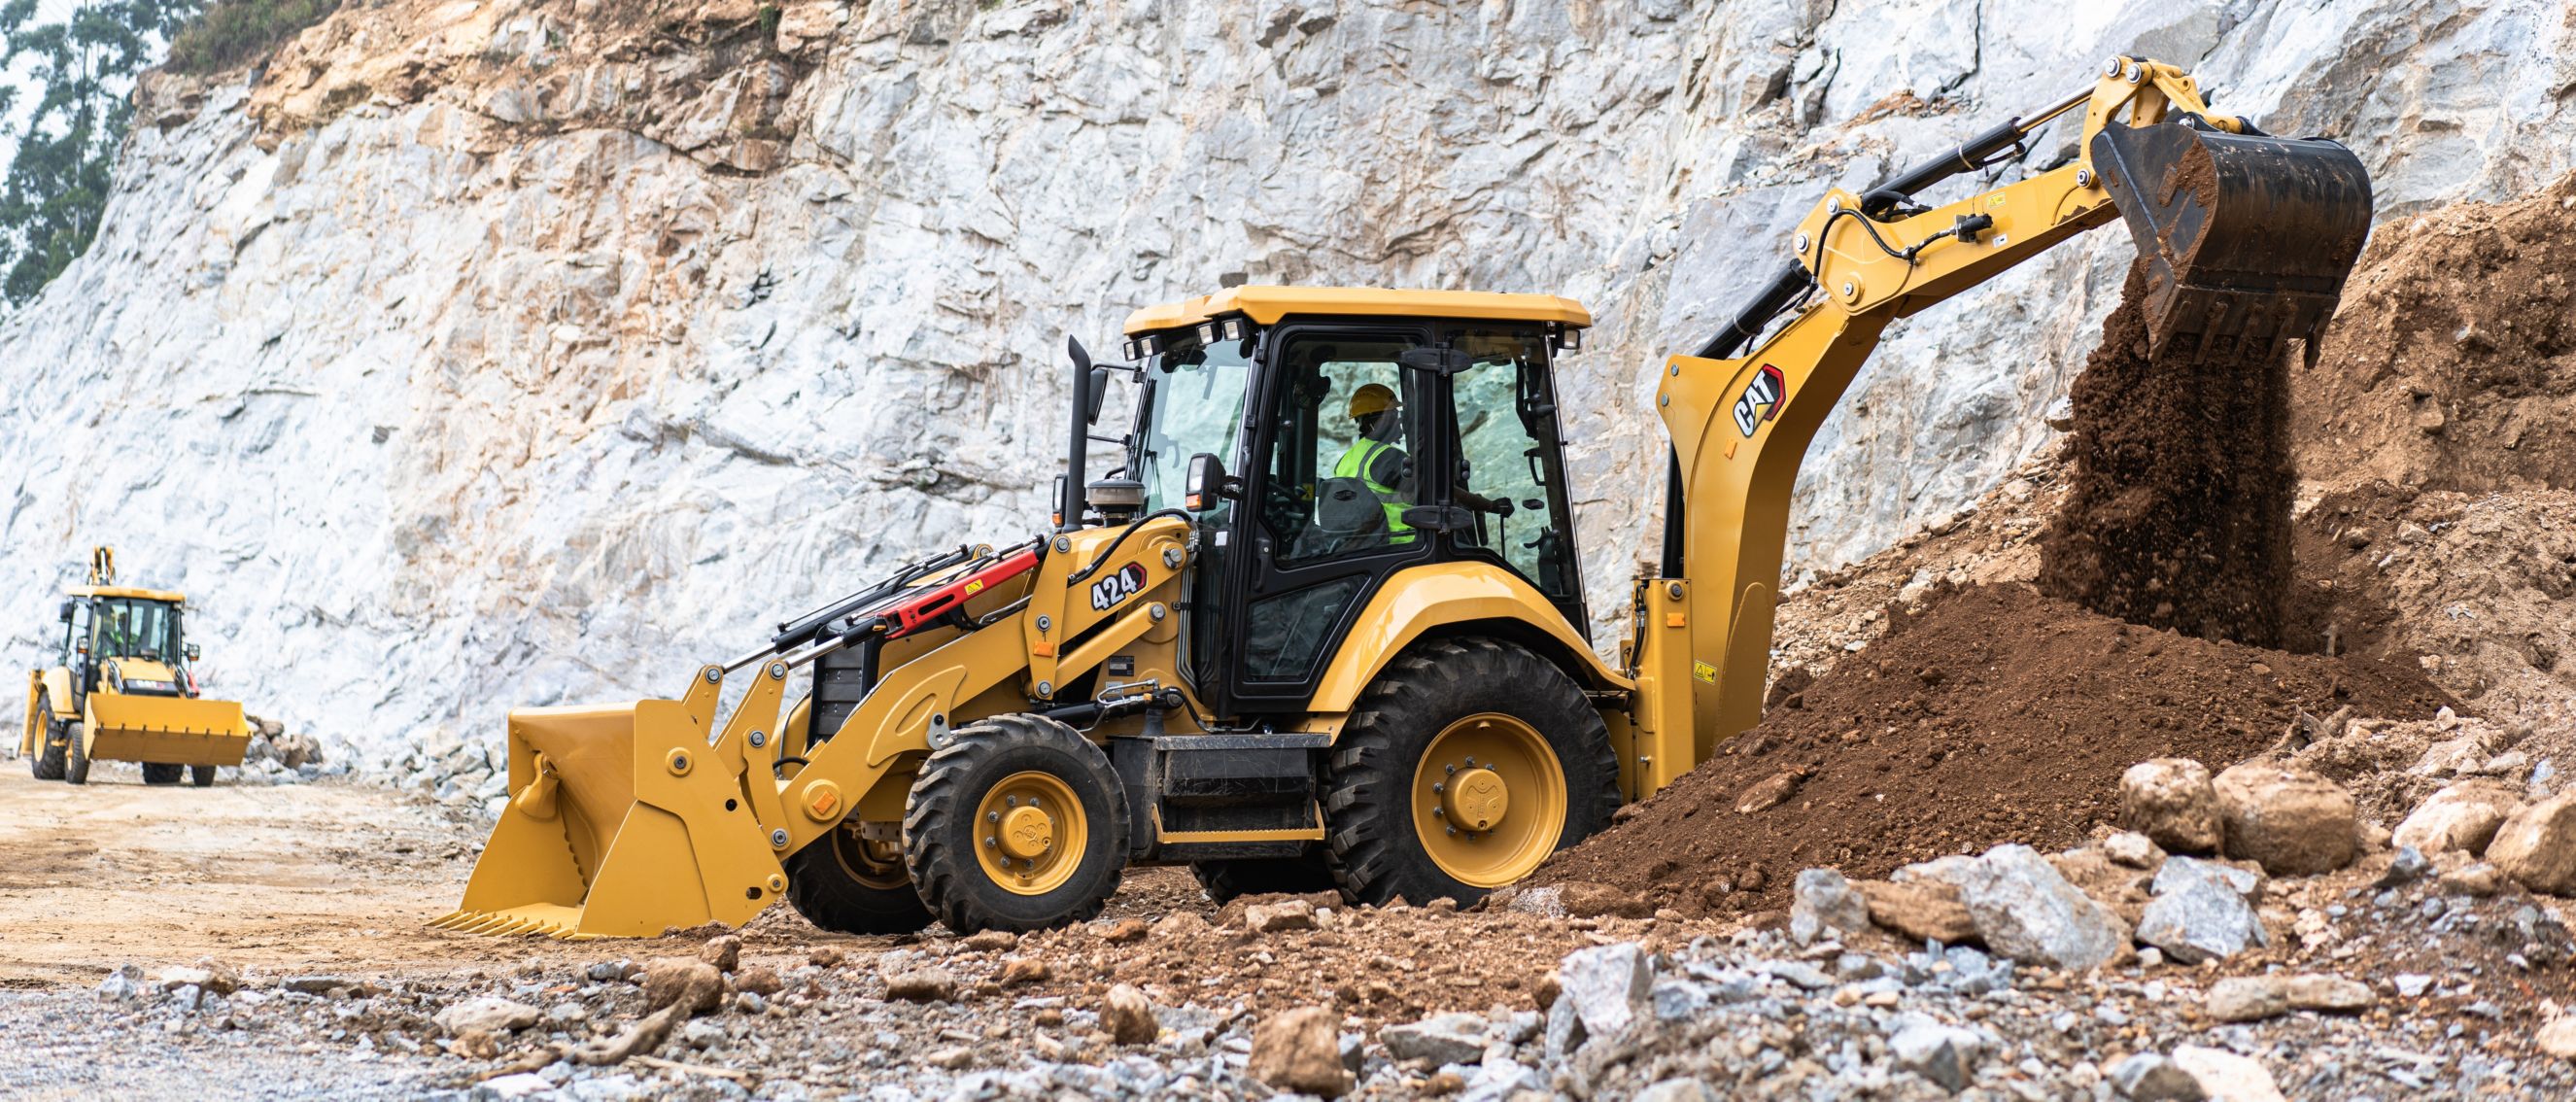 5 Common Used Heavy Equipment Myths and Misconceptions